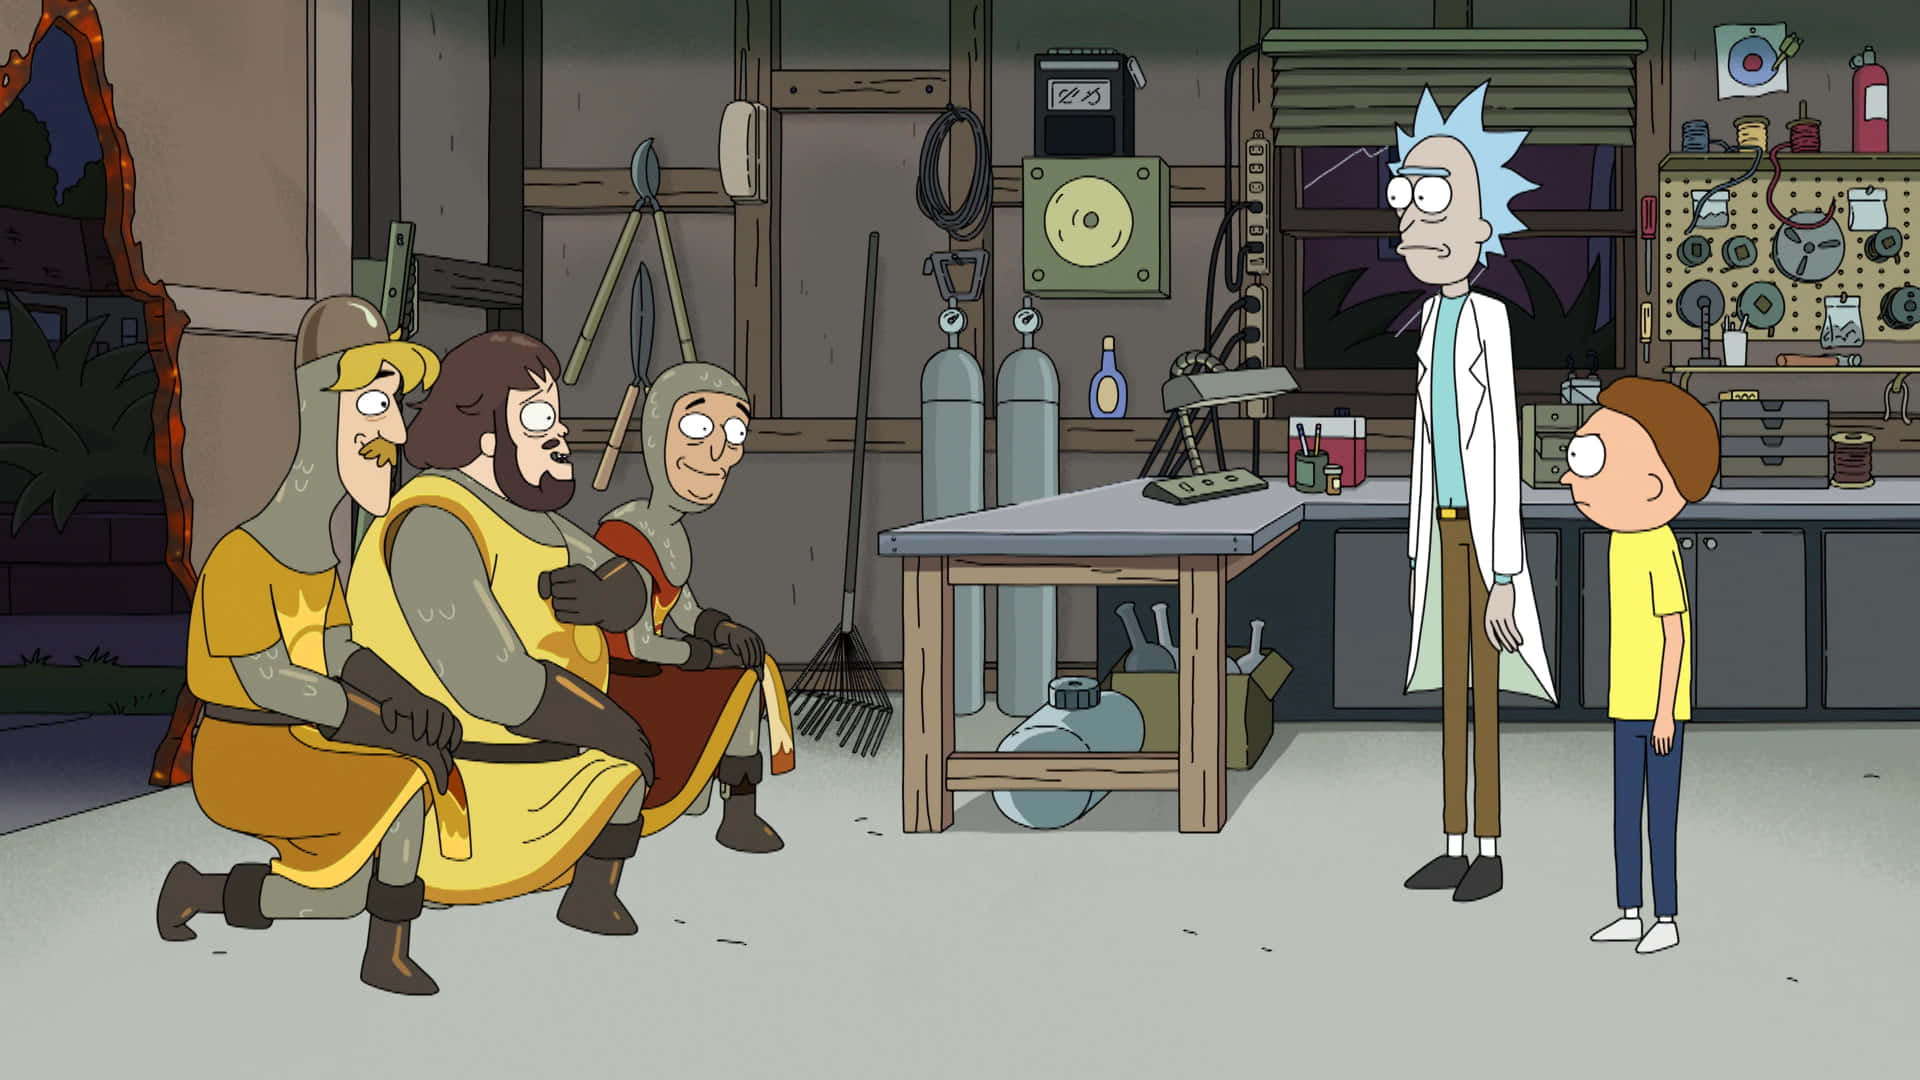 Rick and Morty doing what they do best: getting up to antics.